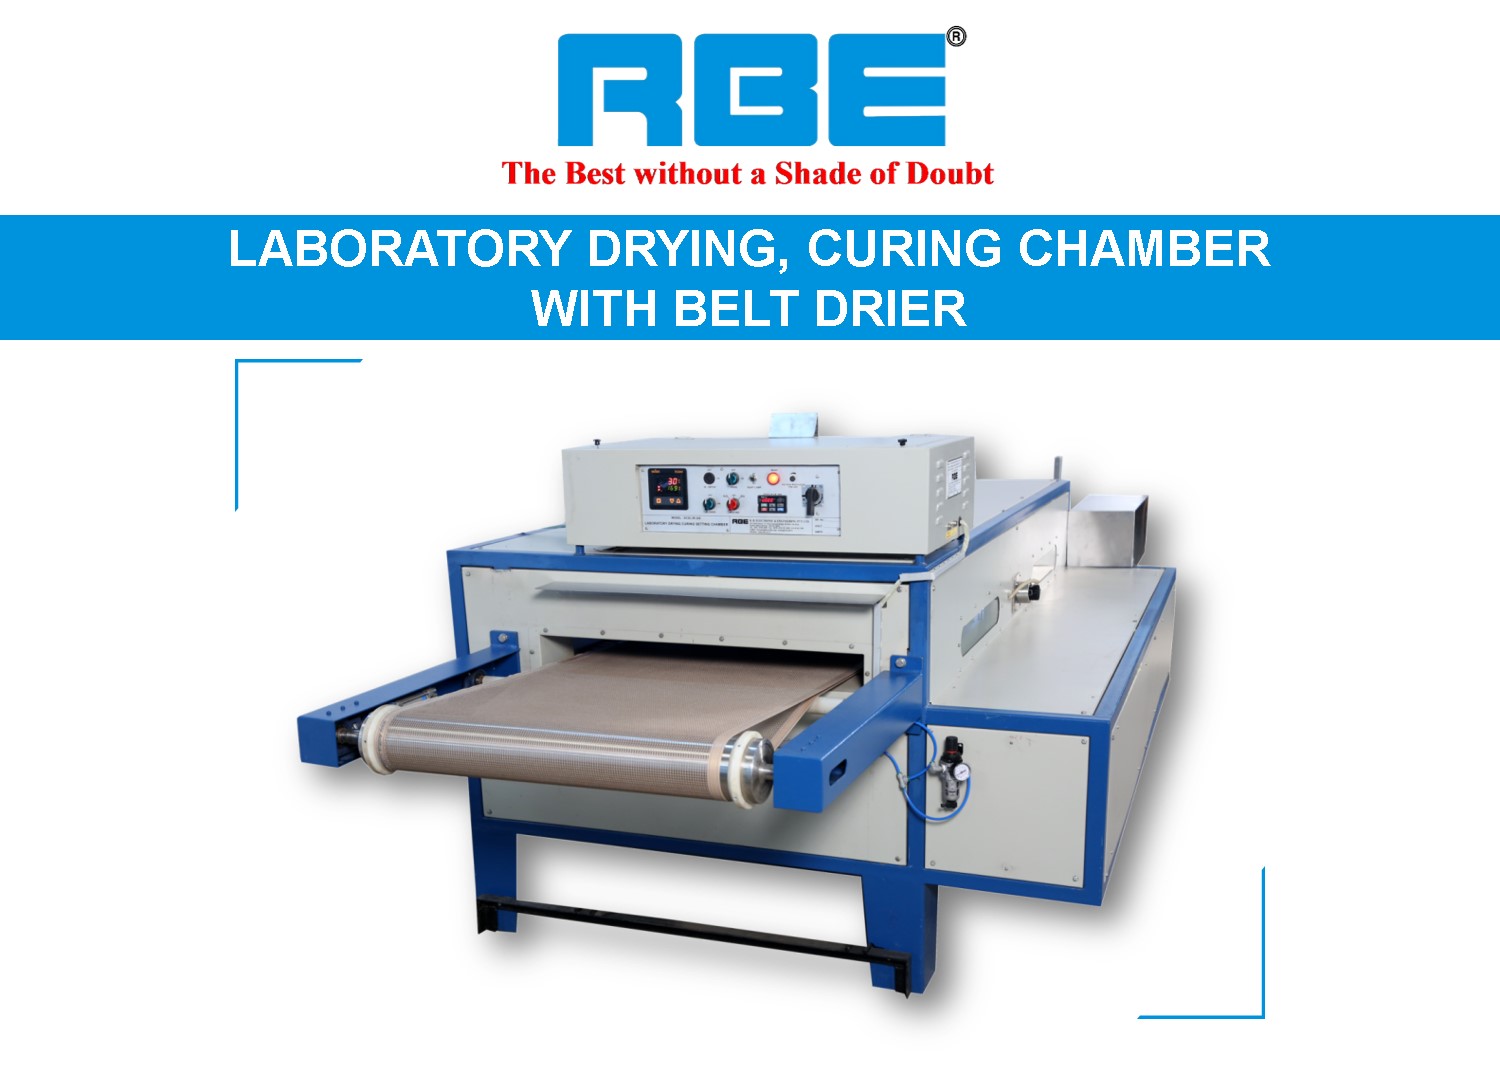 Laboratory Drying, Curing Chamber with Belt Drier